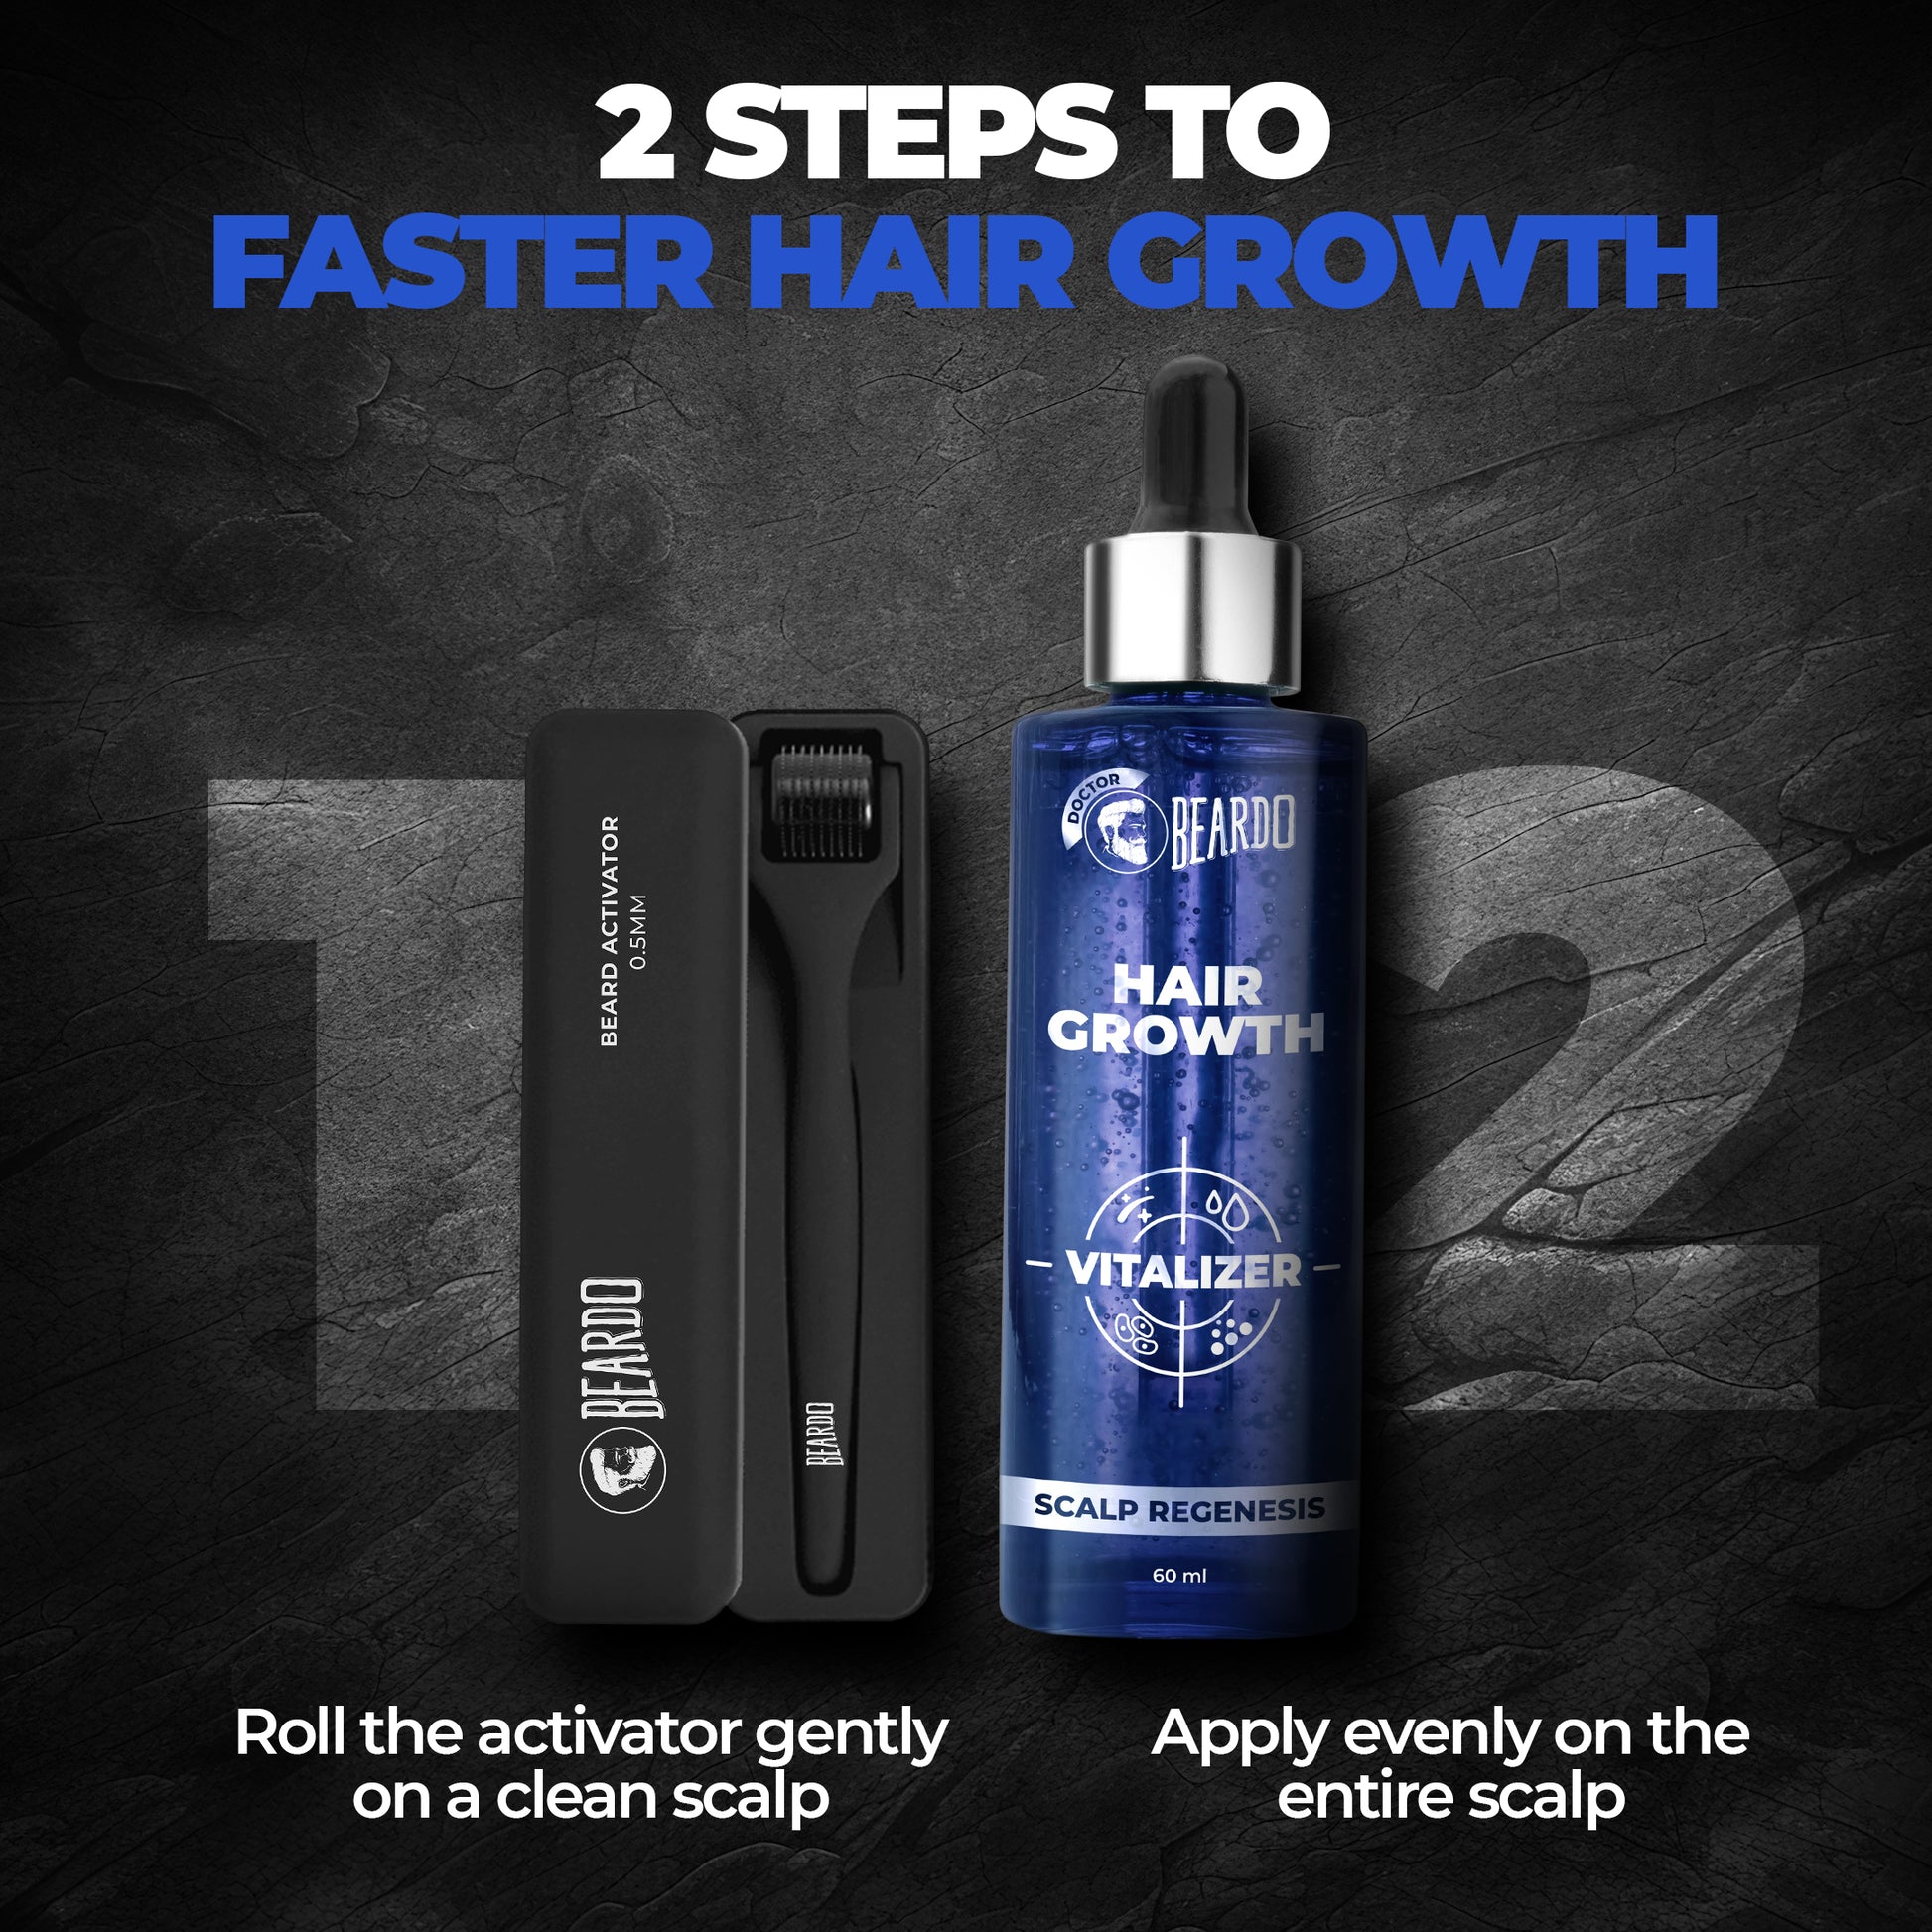 faster hair growth men, how to grow hair faster in men, hair growth, hair regrowth men